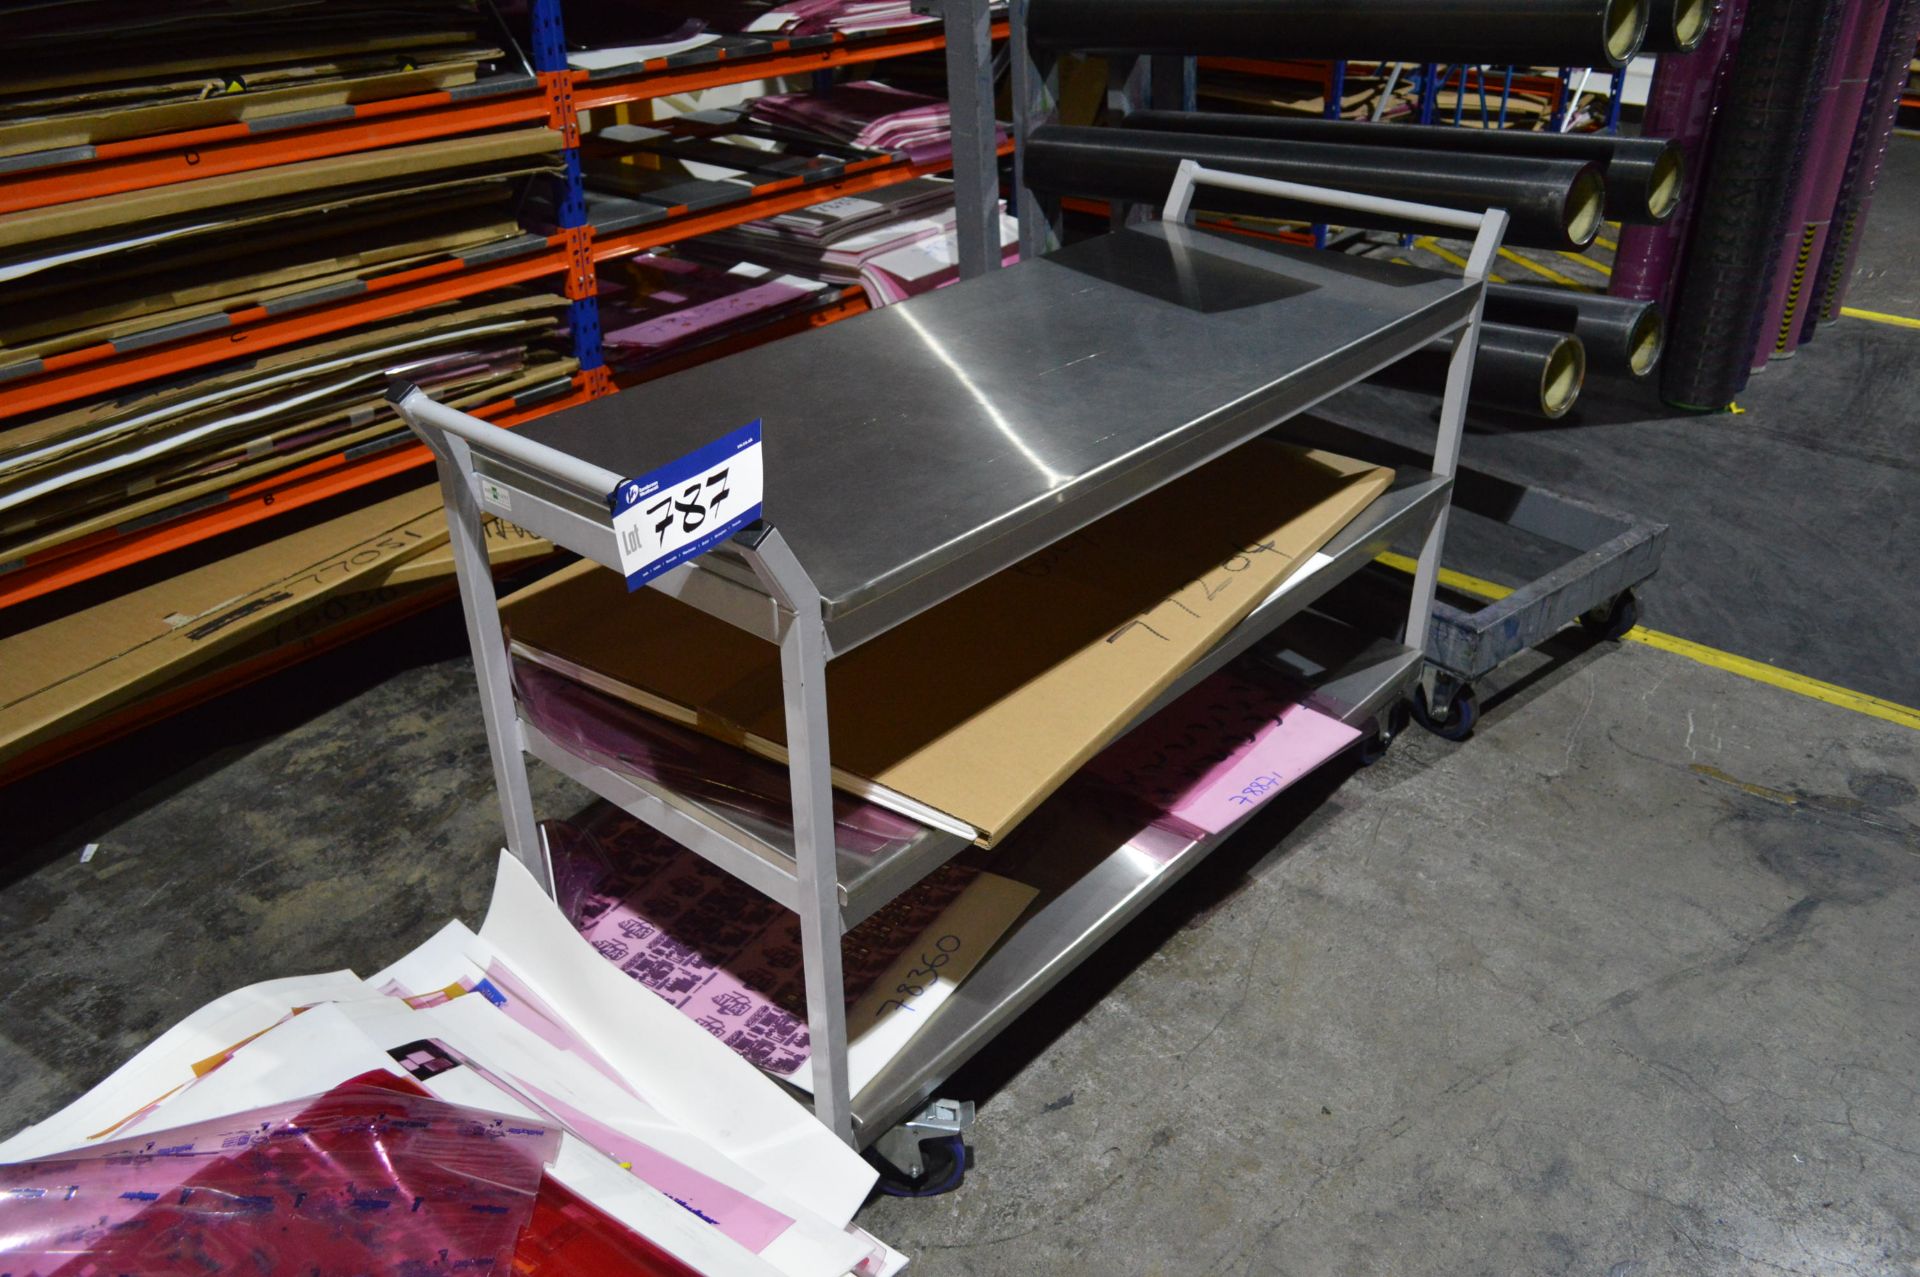 Metal Framed Transporter Trolley, with stainless s